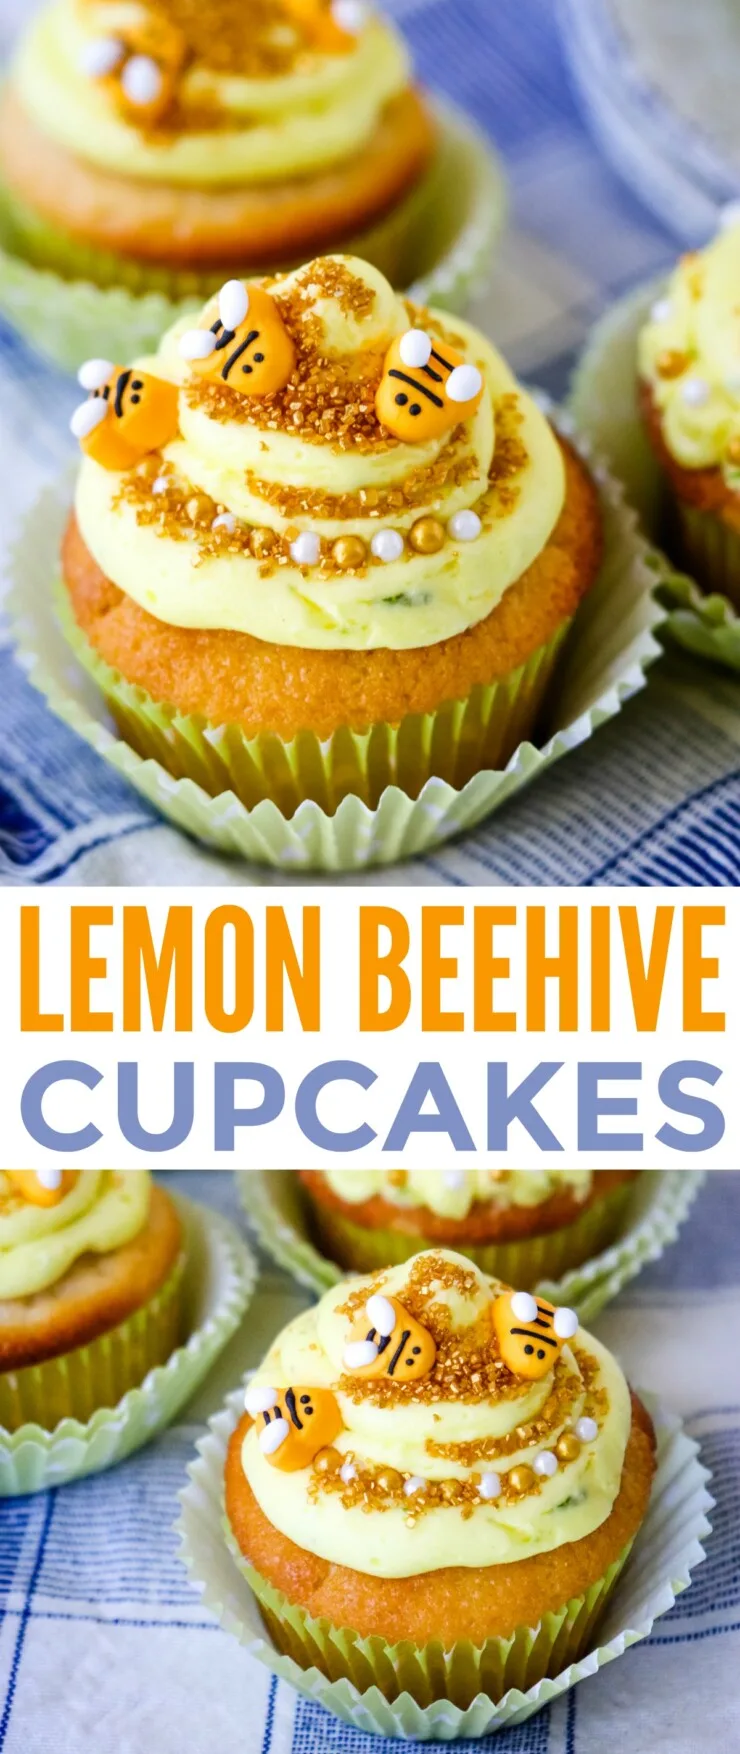 These Lemon Beehive Cupcakes are as delicious as they are stunning. A perfect additon to any party - they make a yummy treat for baby showers, themed birthdays, picnics and more!